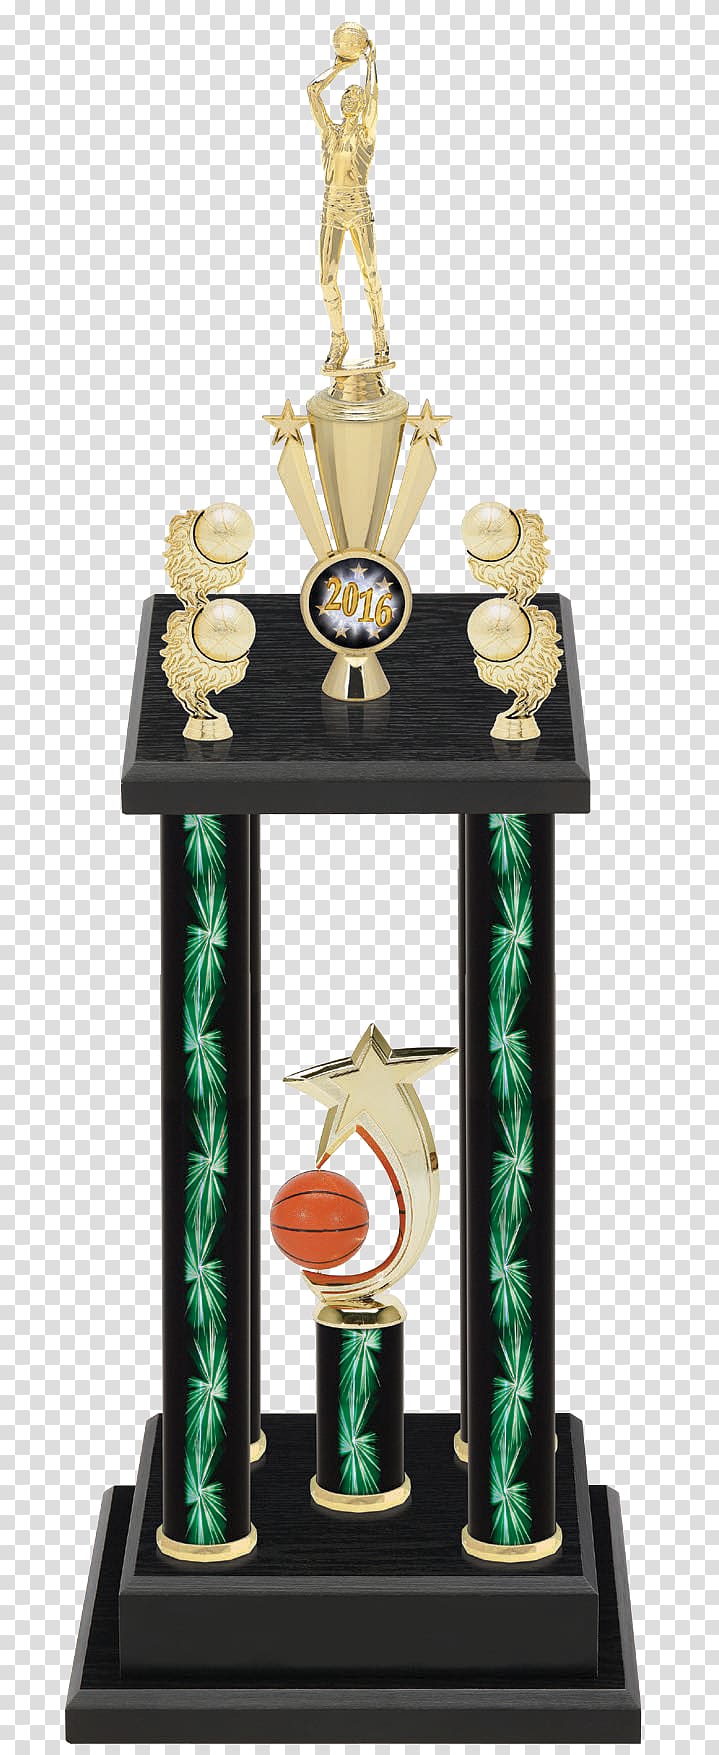 Trophy Basketball Wide column store Football Baseball, Trophy transparent background PNG clipart